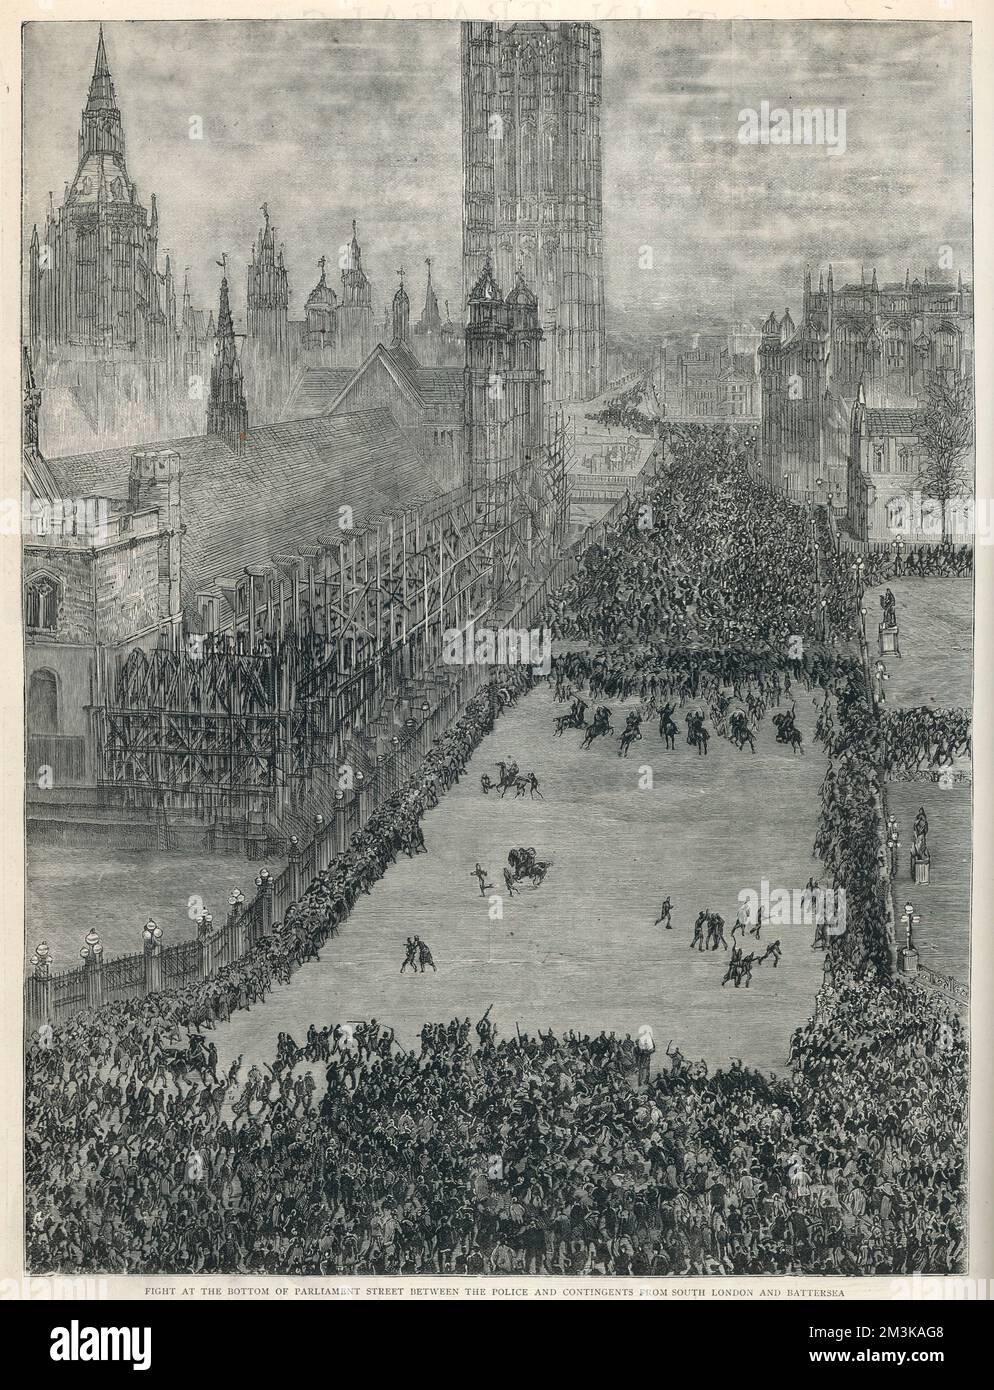 Bloody Sunday, London, 13th November 1887, the name given to a demonstration against coercion in Ireland and to demand the release from prison of MP William O'Brien, who was imprisoned for incitement as a result of an incident in the Irish Land War. The demonstration was organized by the Social Democratic Federation and the Irish National League. A fight between the Police and contingents from South London and Battersea at the bottom of Parliament Street. Stock Photo